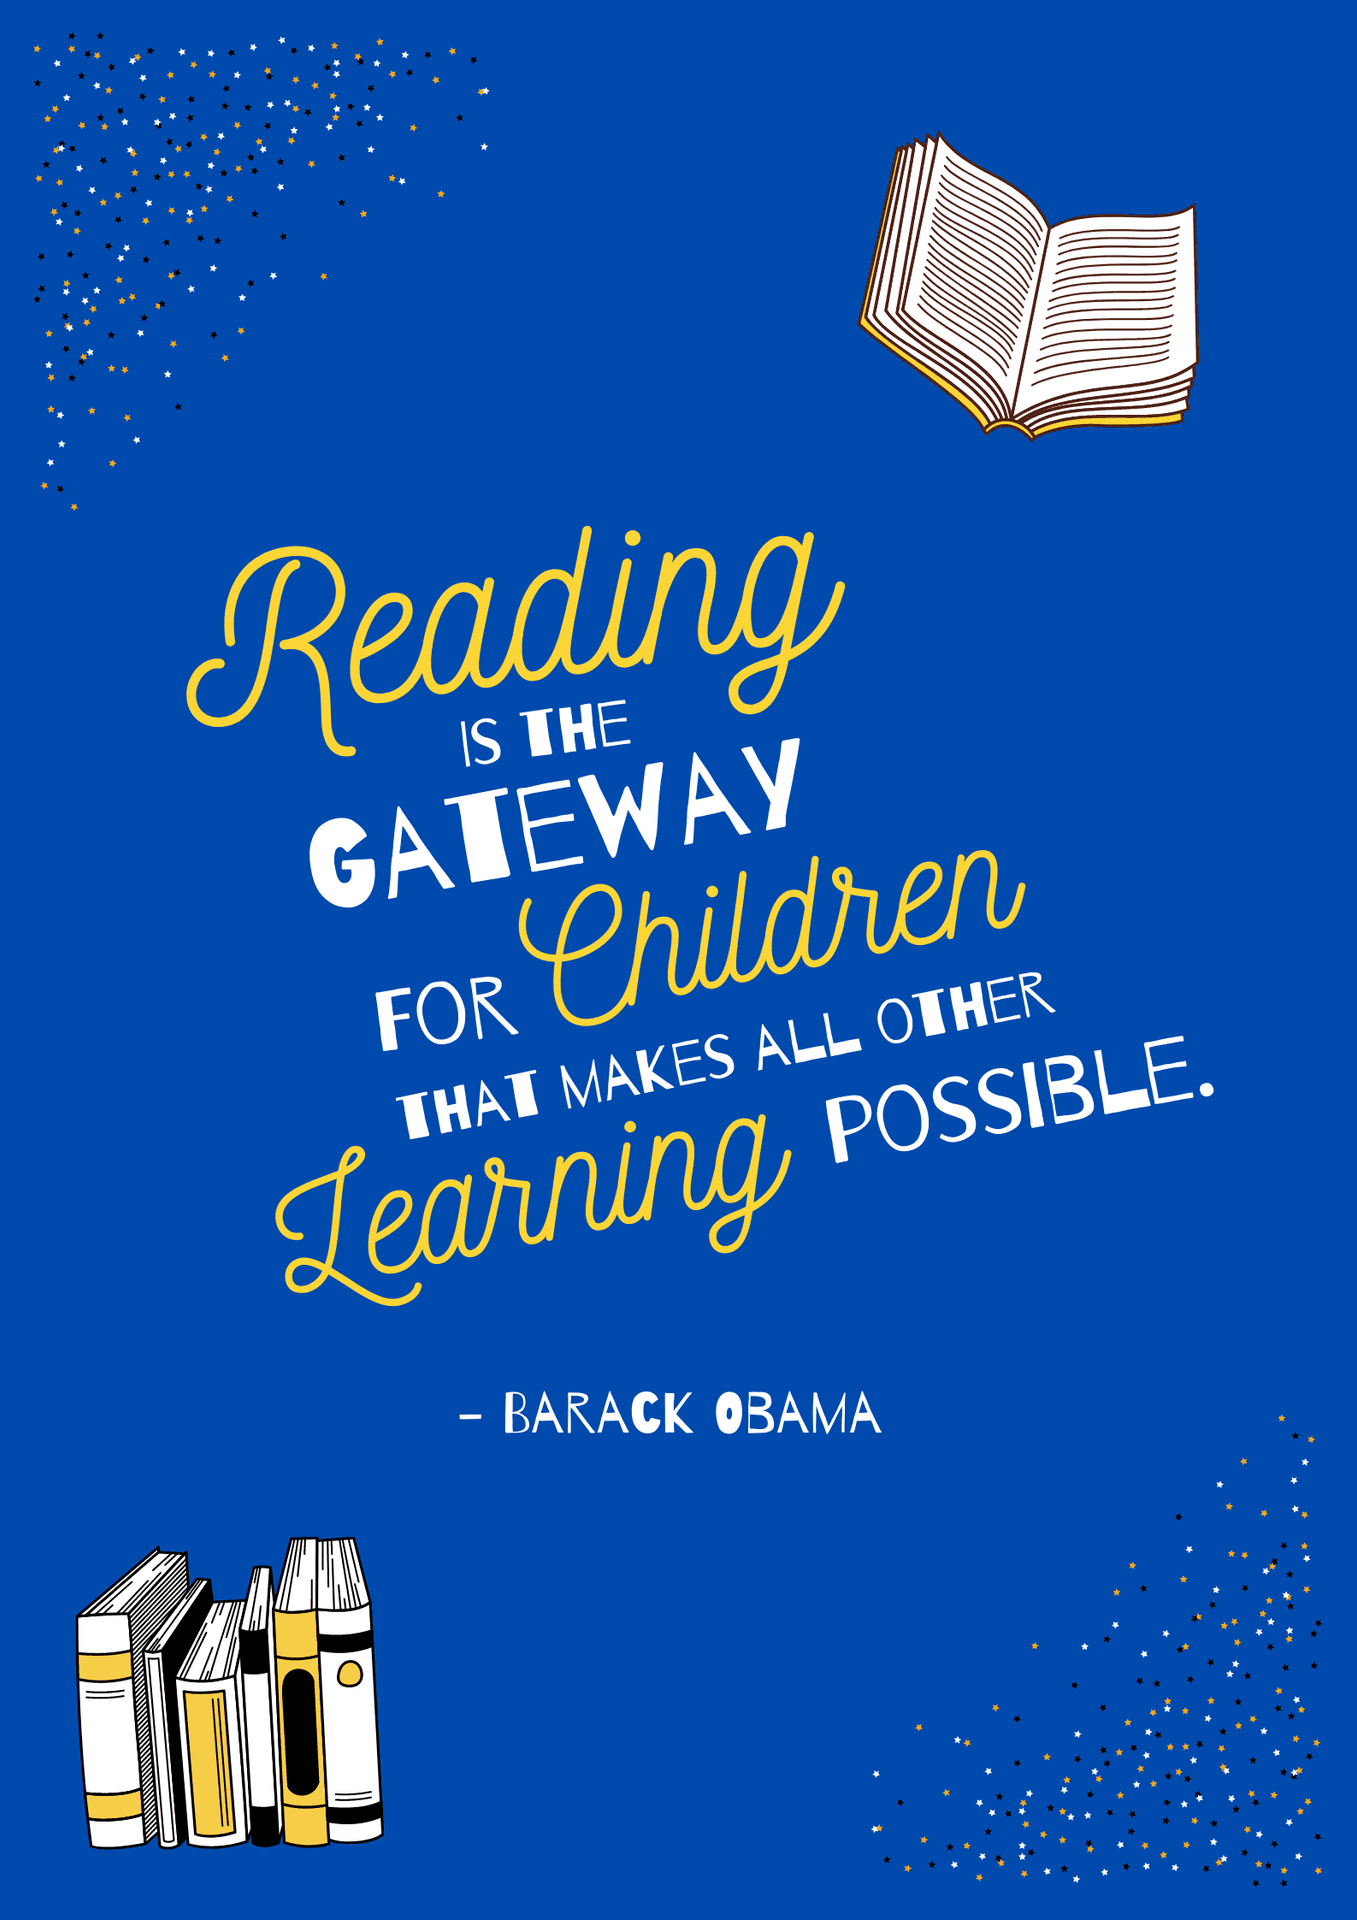 Reading Is The Gateway For Children To Make Reading Possible